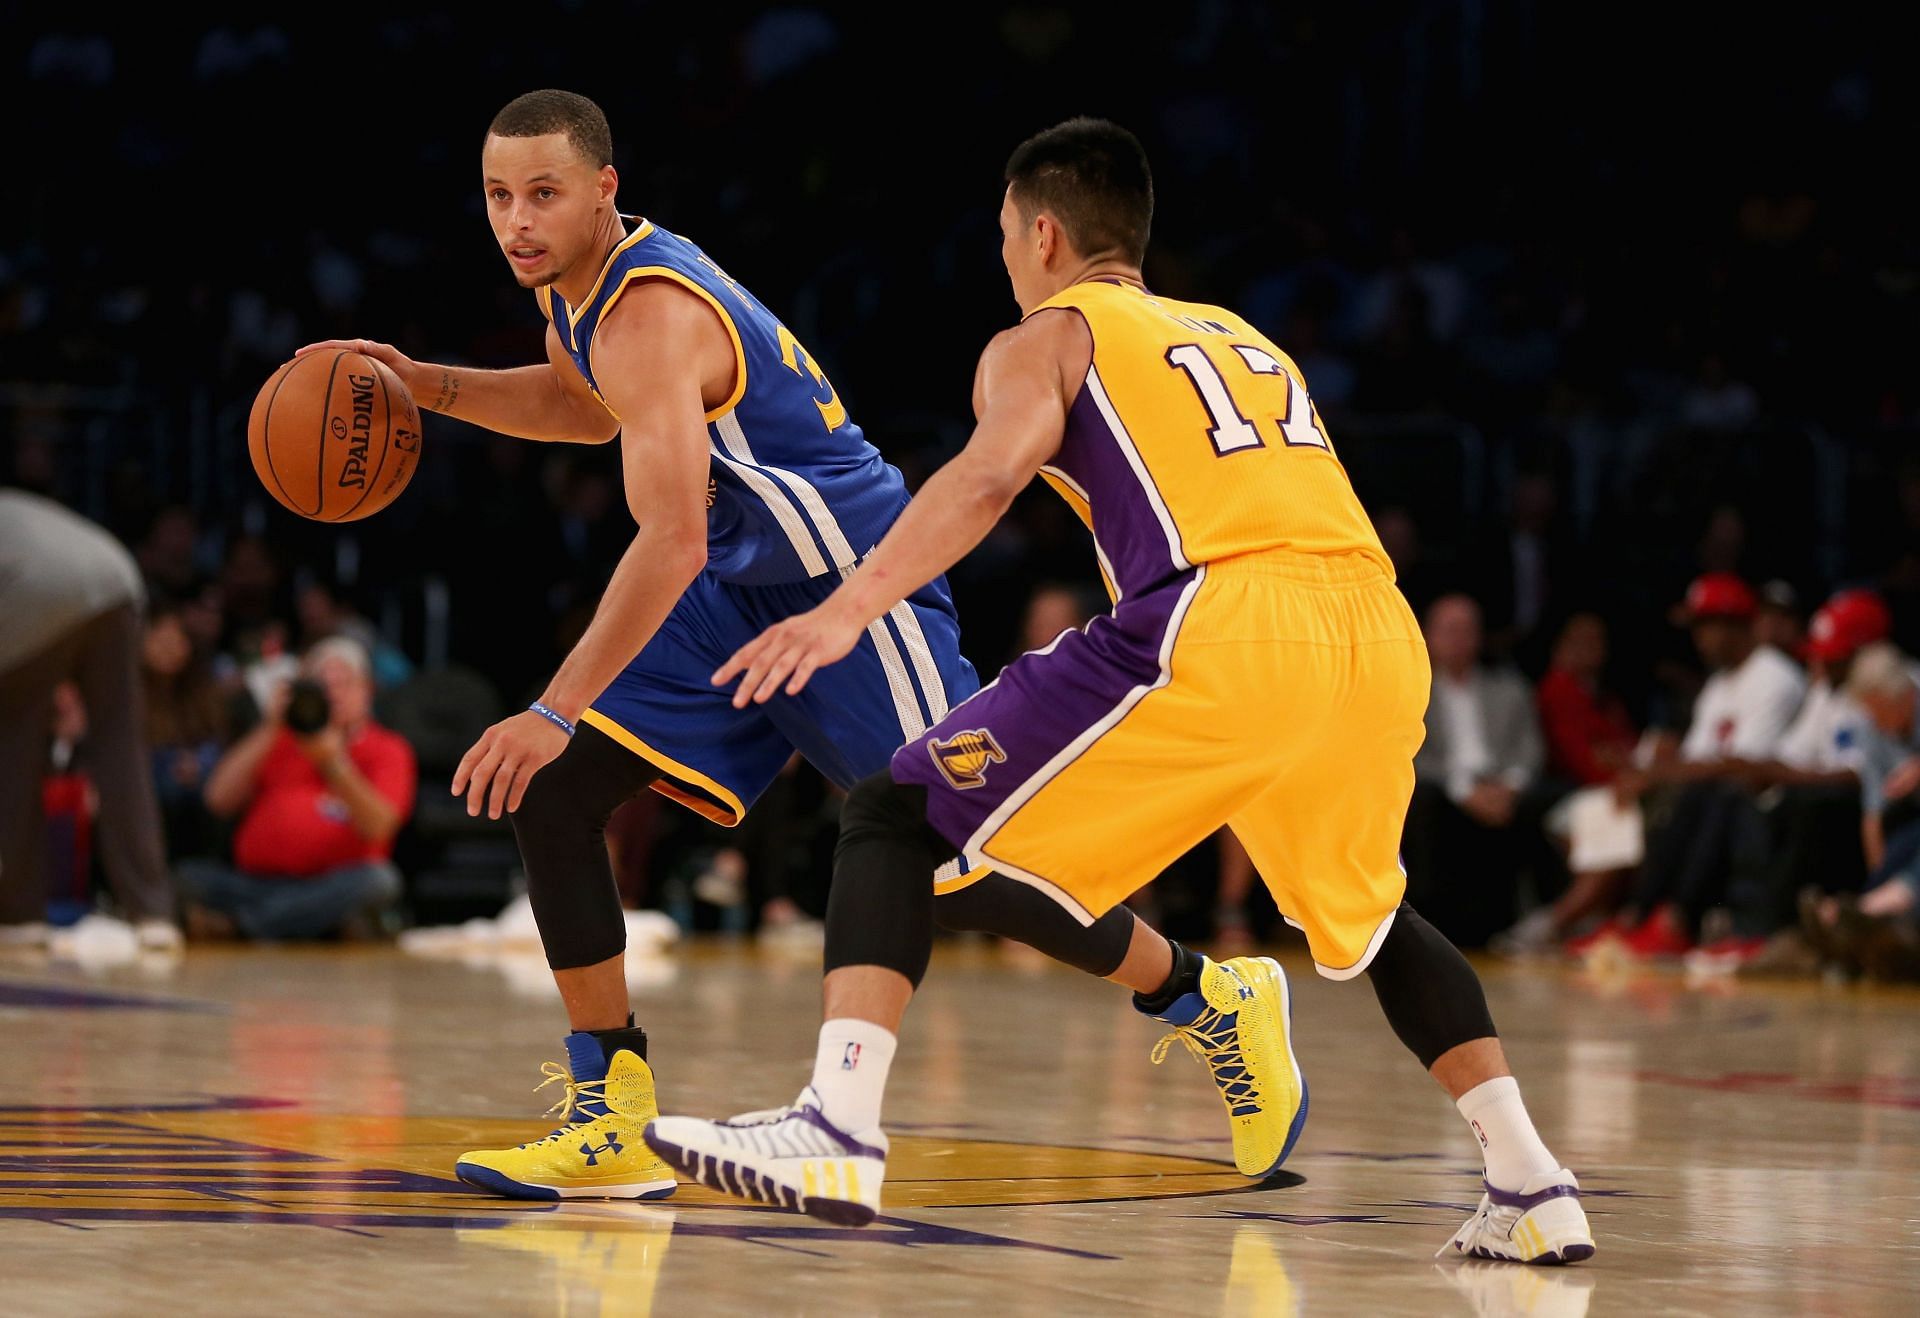 Steph Curry of the Golden State Warriors and Jeremy Lin of the LA Lakers